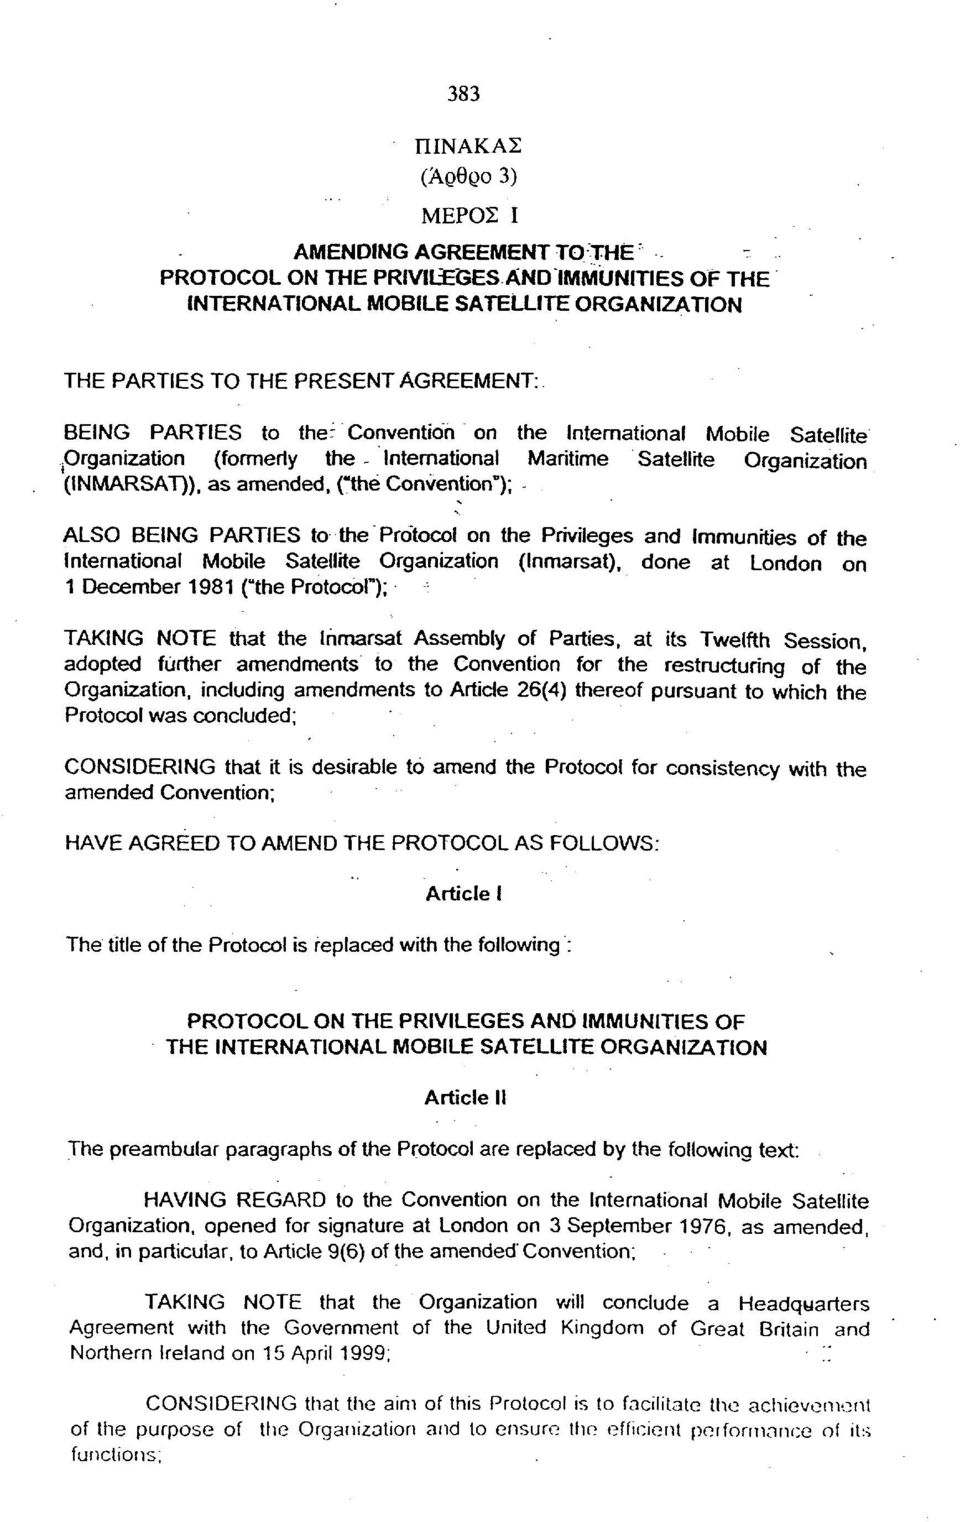 Organization (formerly the - International Maritime Satellite Organization (INMARSAT)), as amended, ("the Convention"); ALSO BEING PARTIES to the Protocol on the Privileges and Immunities of the